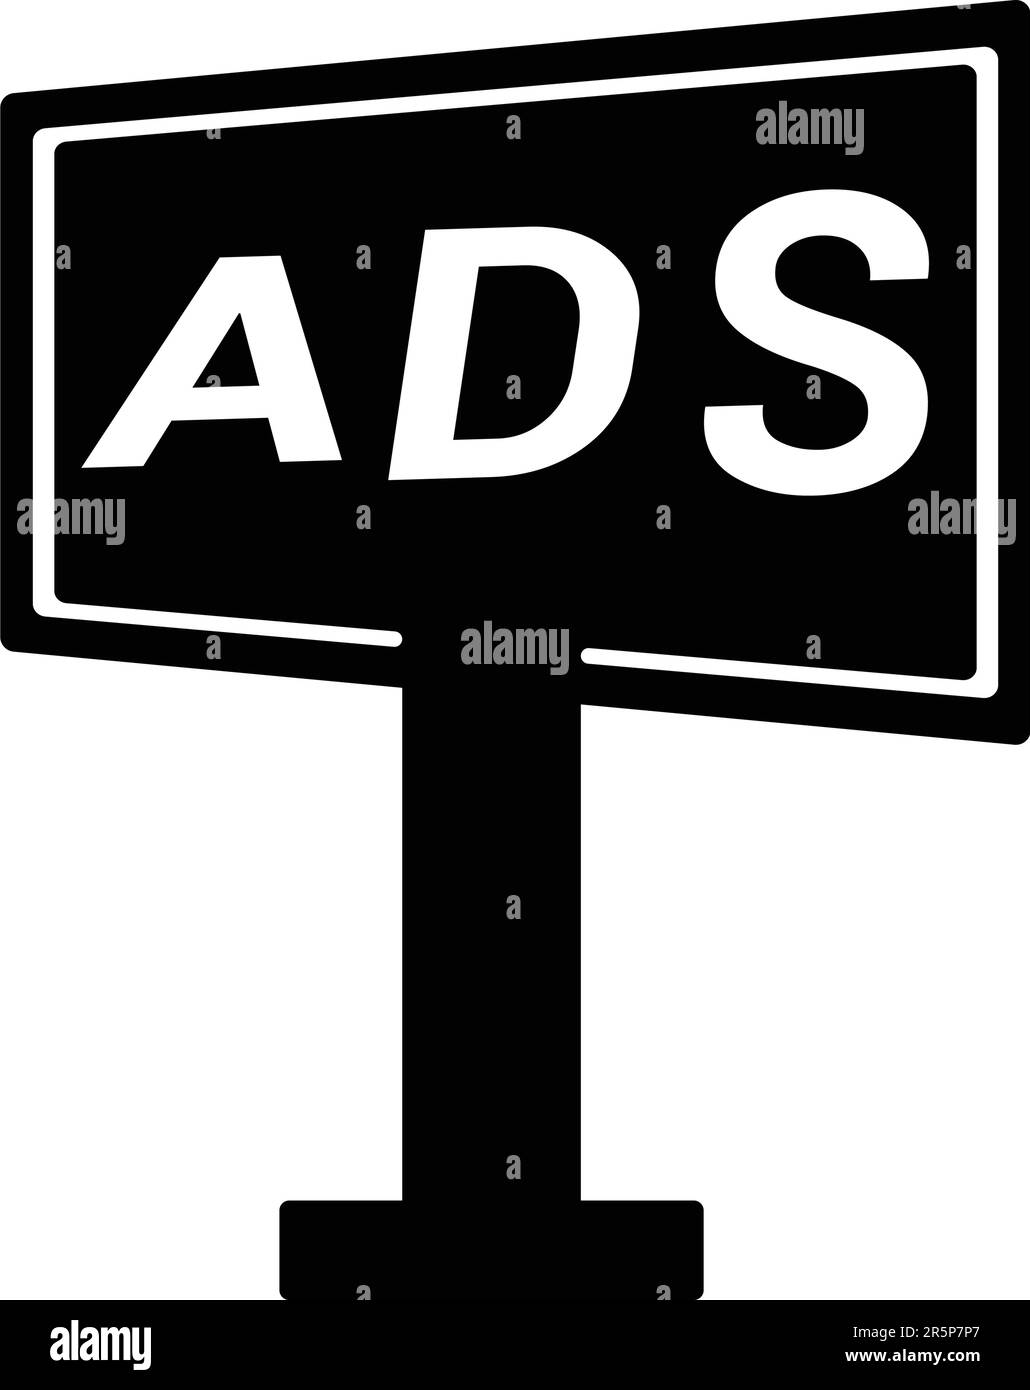 Advertising, billboard icon design for commercial use, web, print media or any type of design projects. Stock Vector